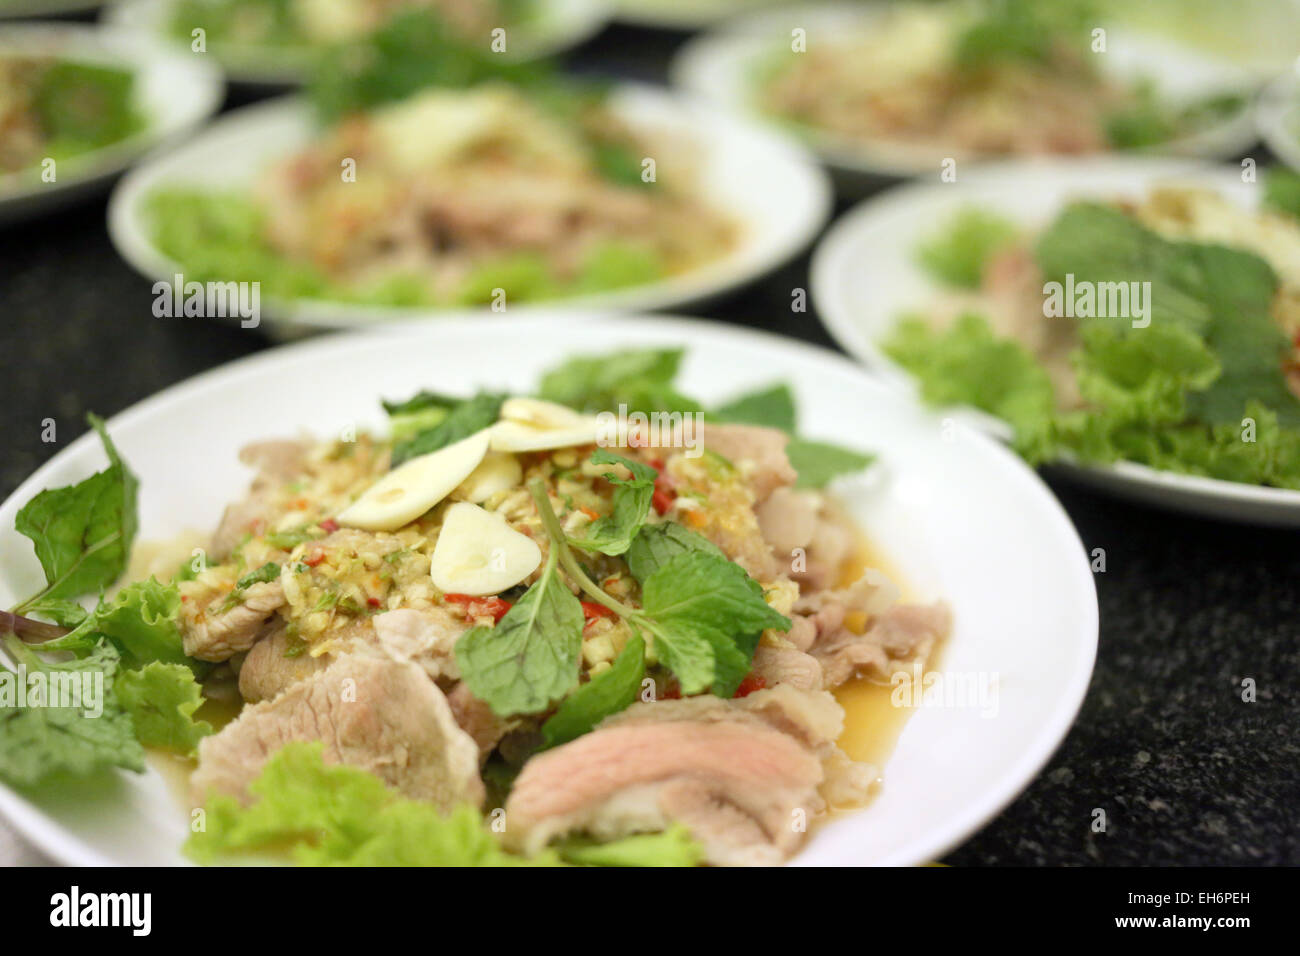 Sour Pork Salad is the local cuisine of Thailand. Stock Photo